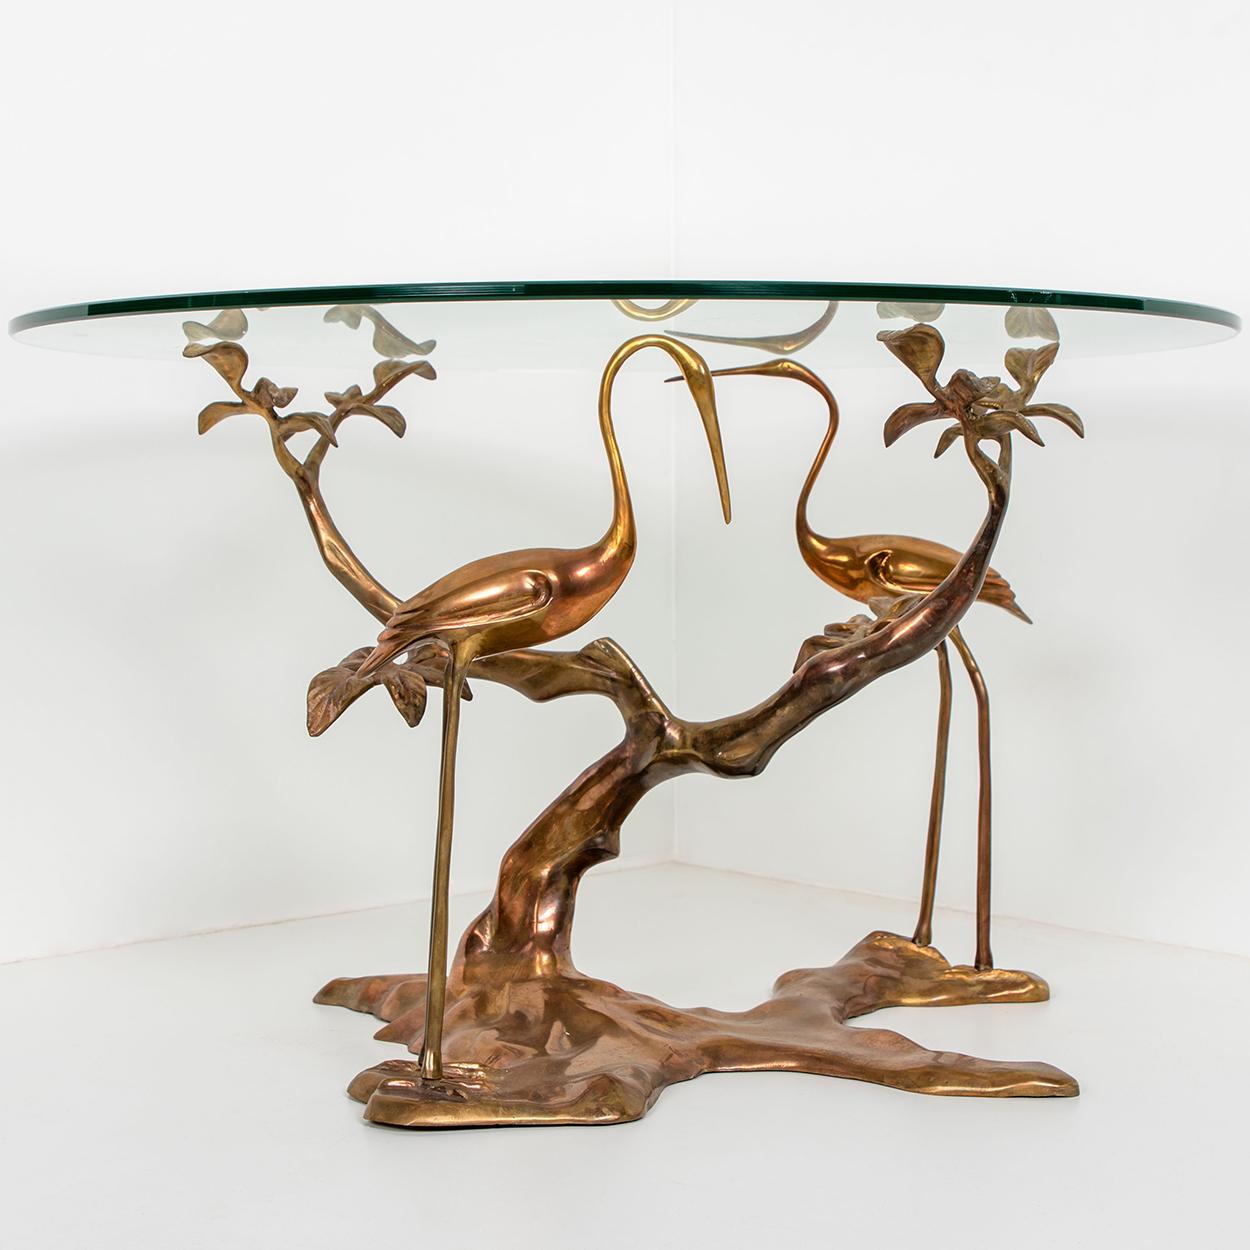 Stunning brass coffee table. With two bird shapes in full brass. The brass base and table top is in very good condition. The pictures show the original, old aged state. It gives the piece character. But if requested, it can be polished by us, to